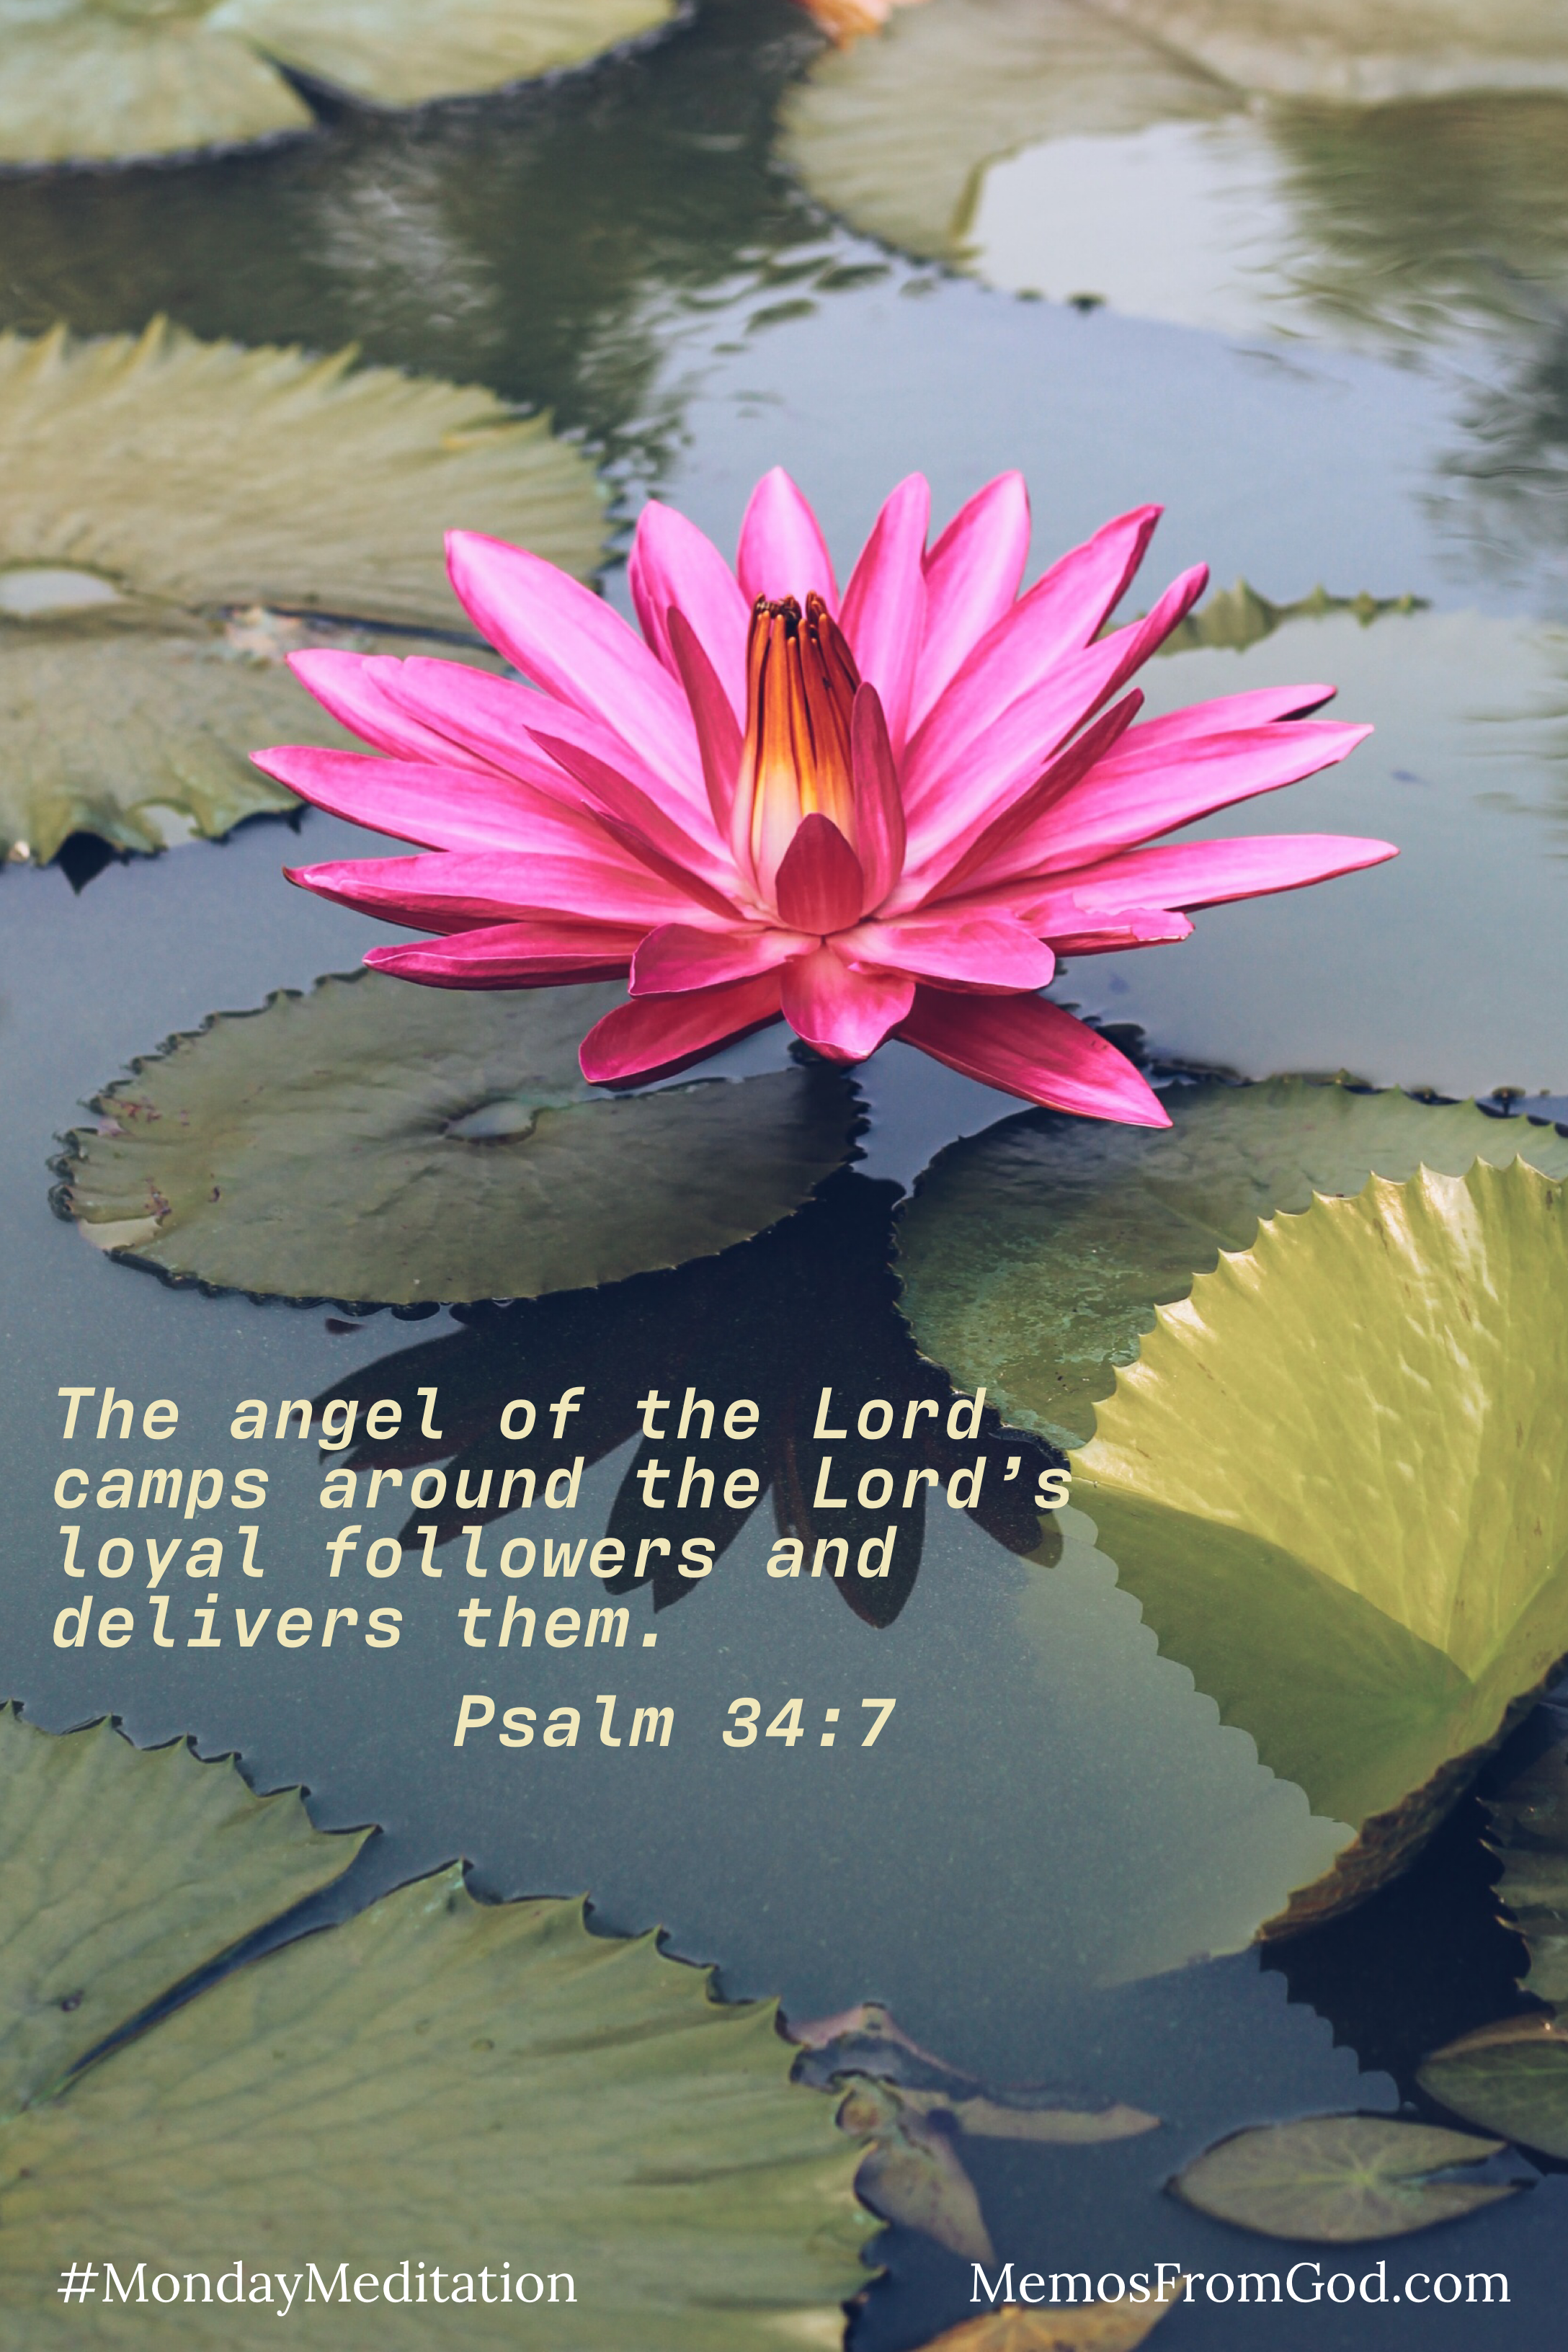 A deep pink water lily in a dark green pond. Caption: The angel of the Lord camps around the Lord's loyal followers and delivers them. Psalm 34:7